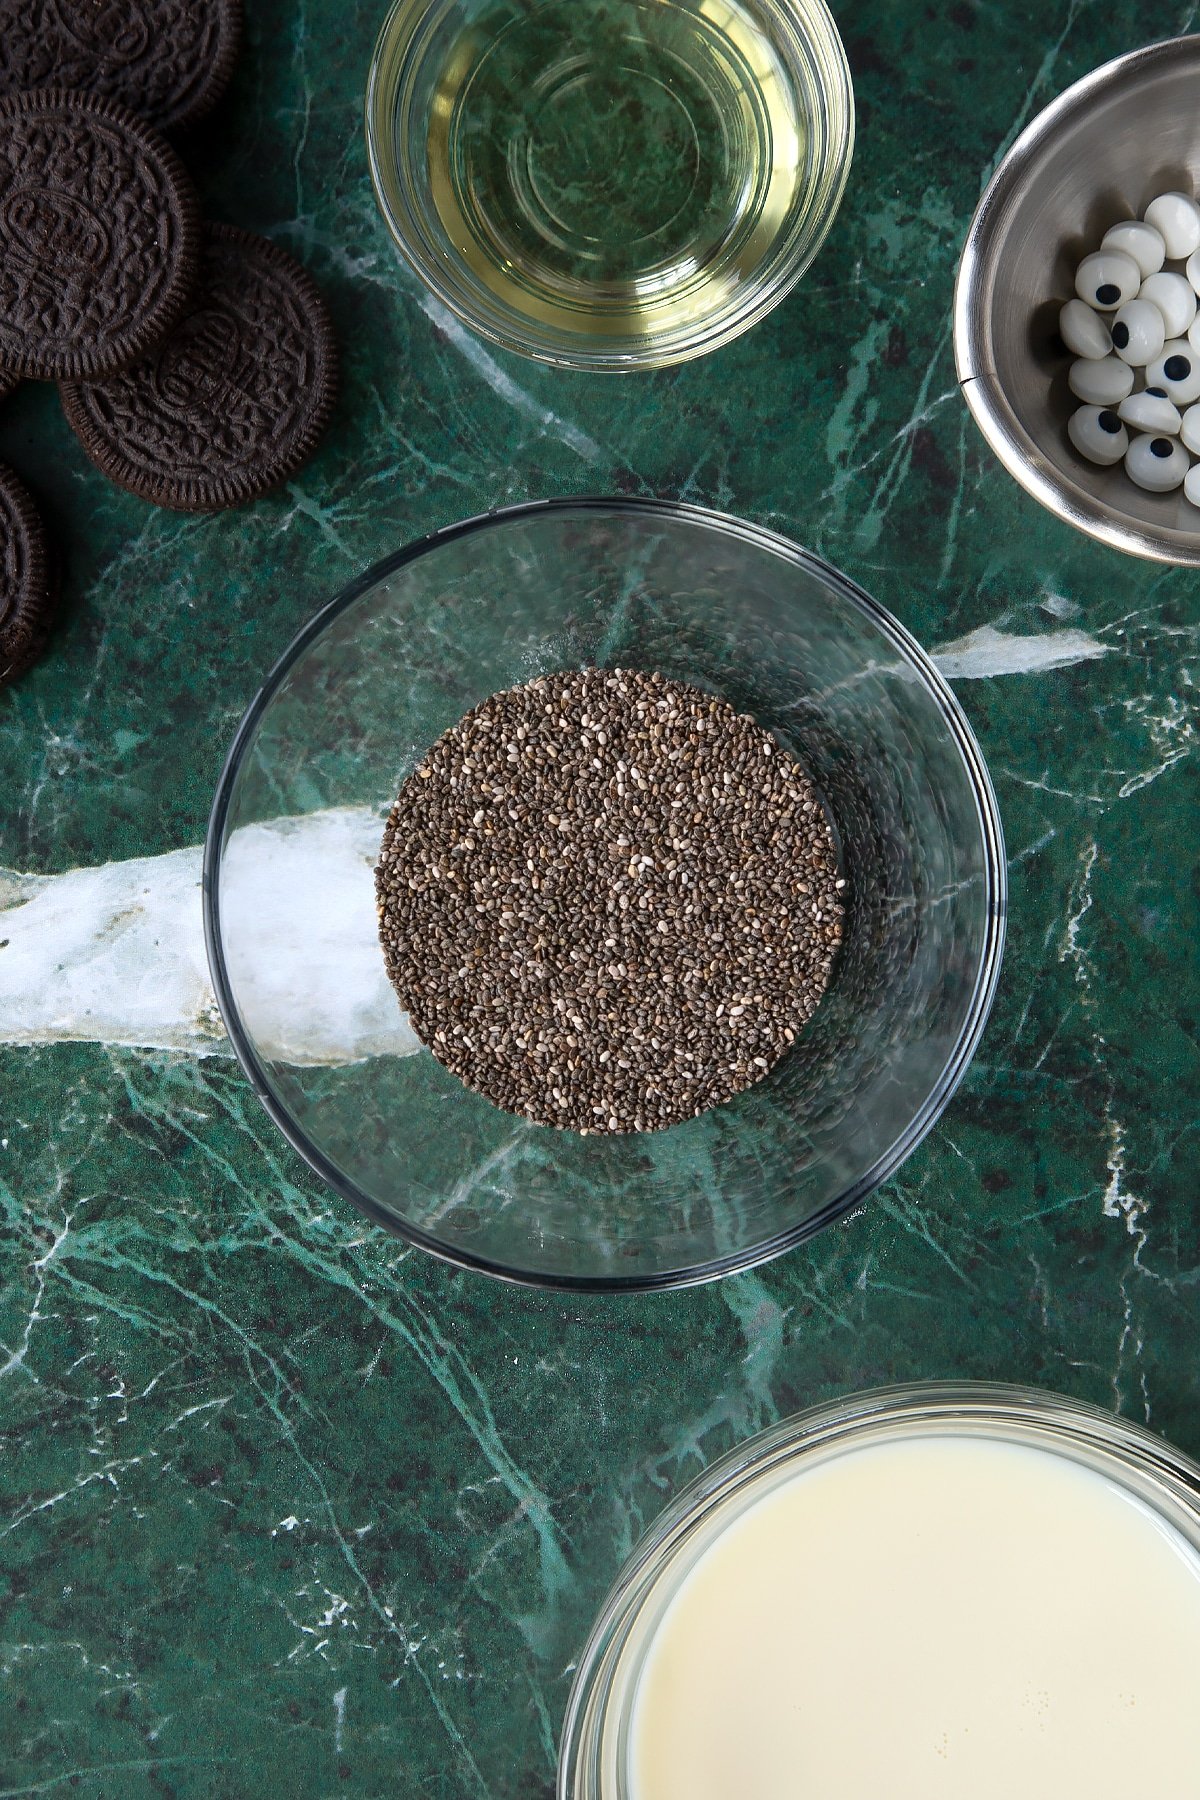 Chia seeds in a small glass bowl. Ingredients to make vegan Halloween cupcakes surround the bowl.